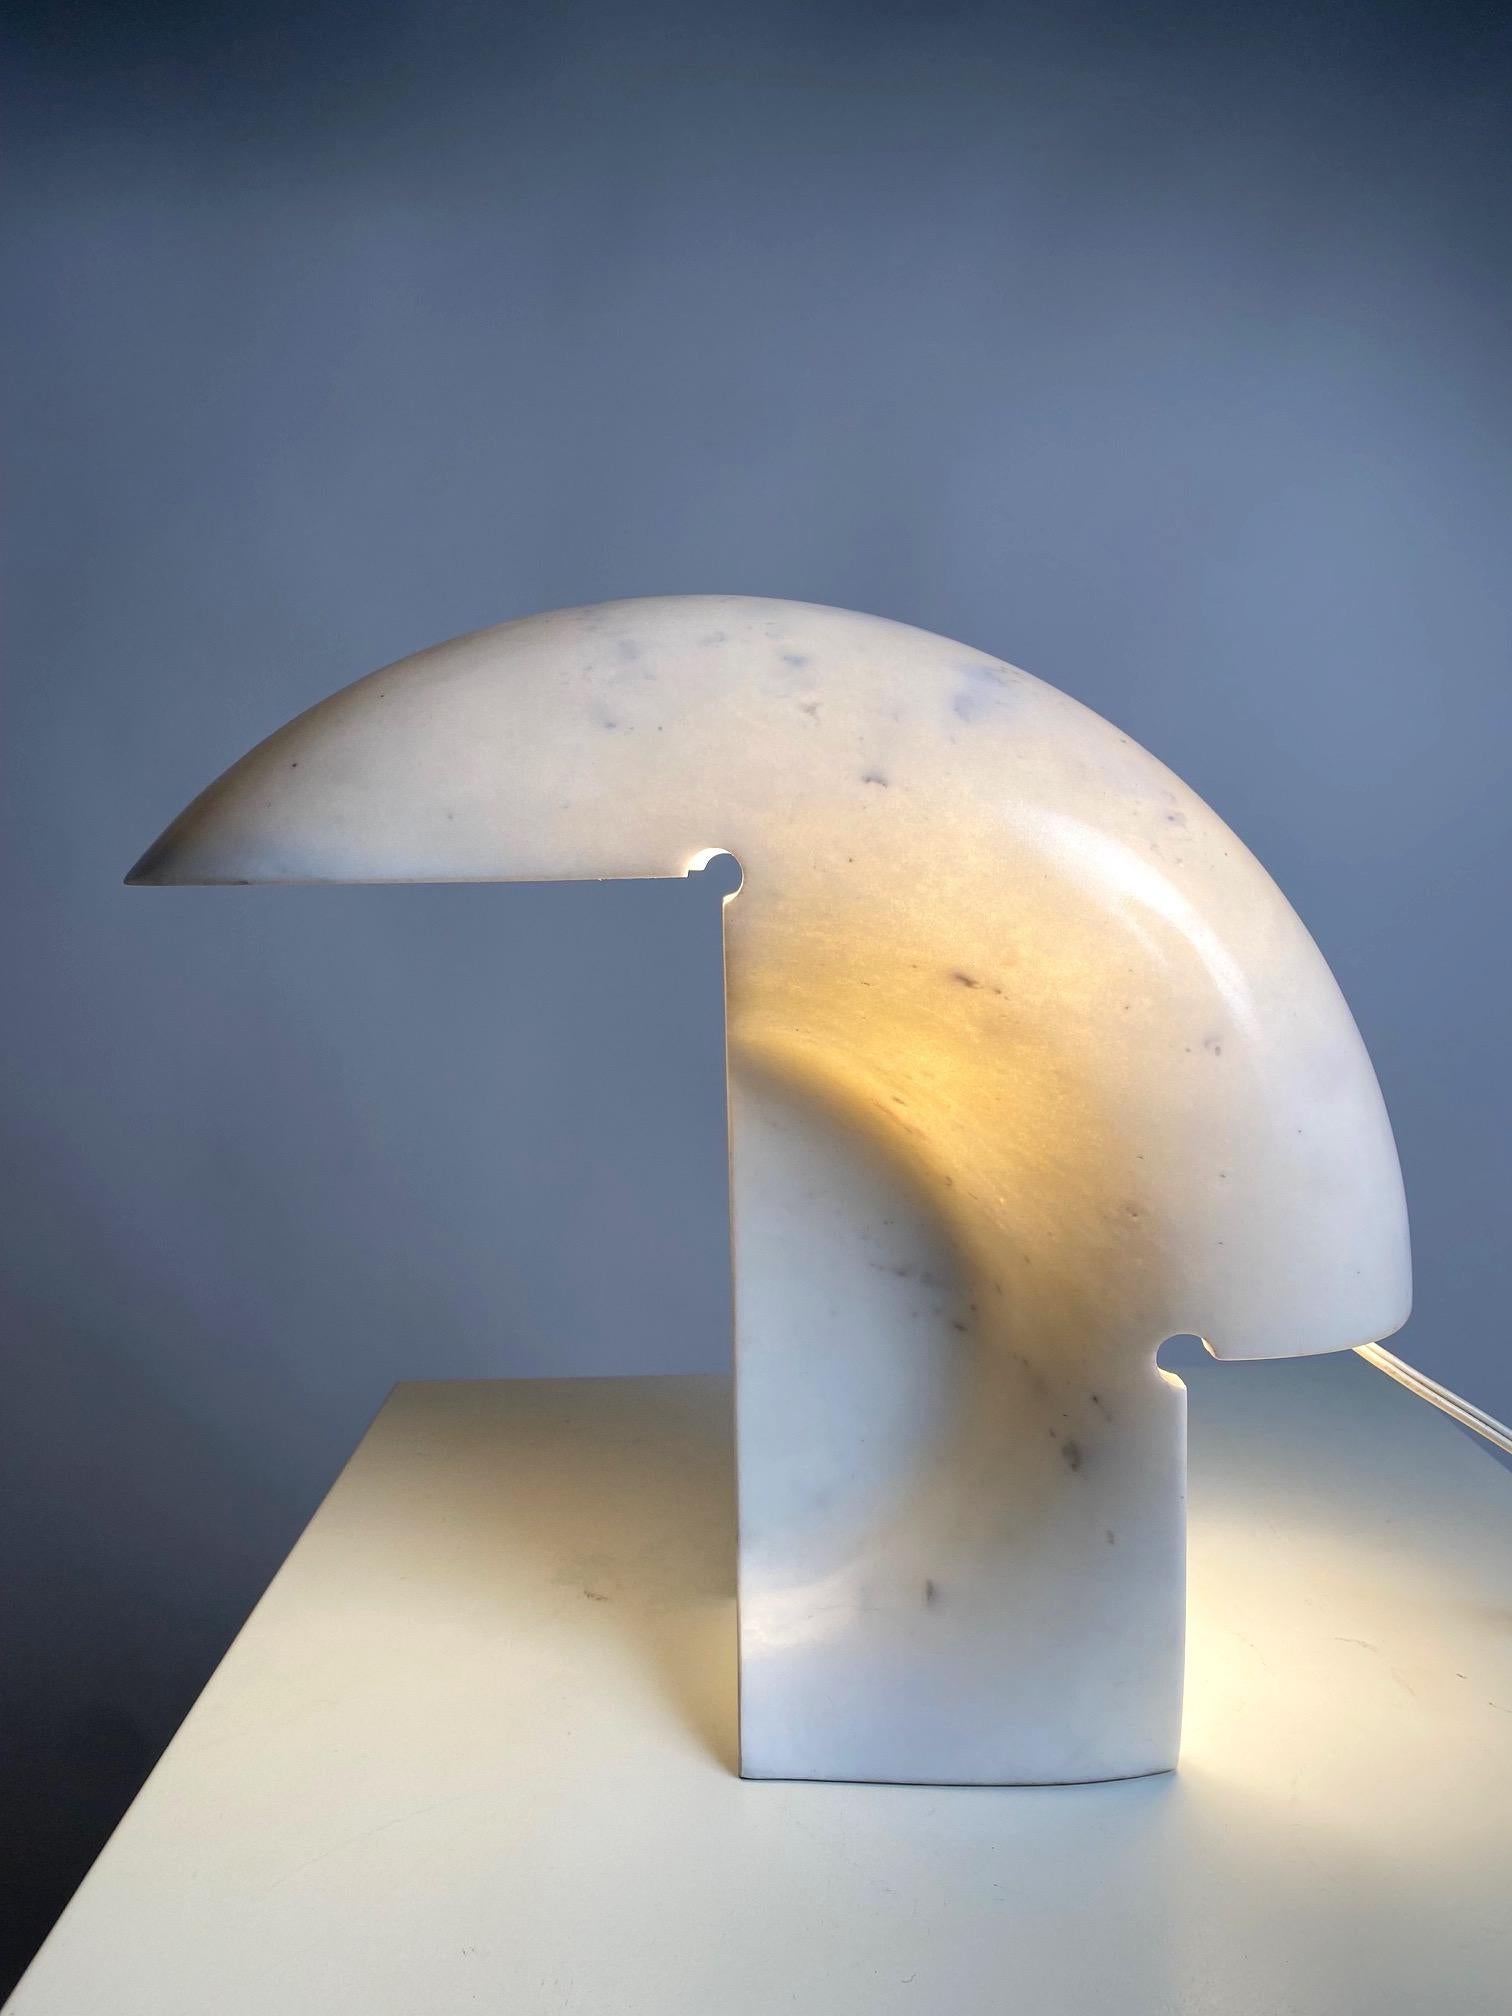 One of the most iconic and elegant lamps of Italian design, designed by the great architect and designer Tobia Scarpa and made entirely by carving out a single block of marble.

It gives off a warm and enveloping light, which filters through the